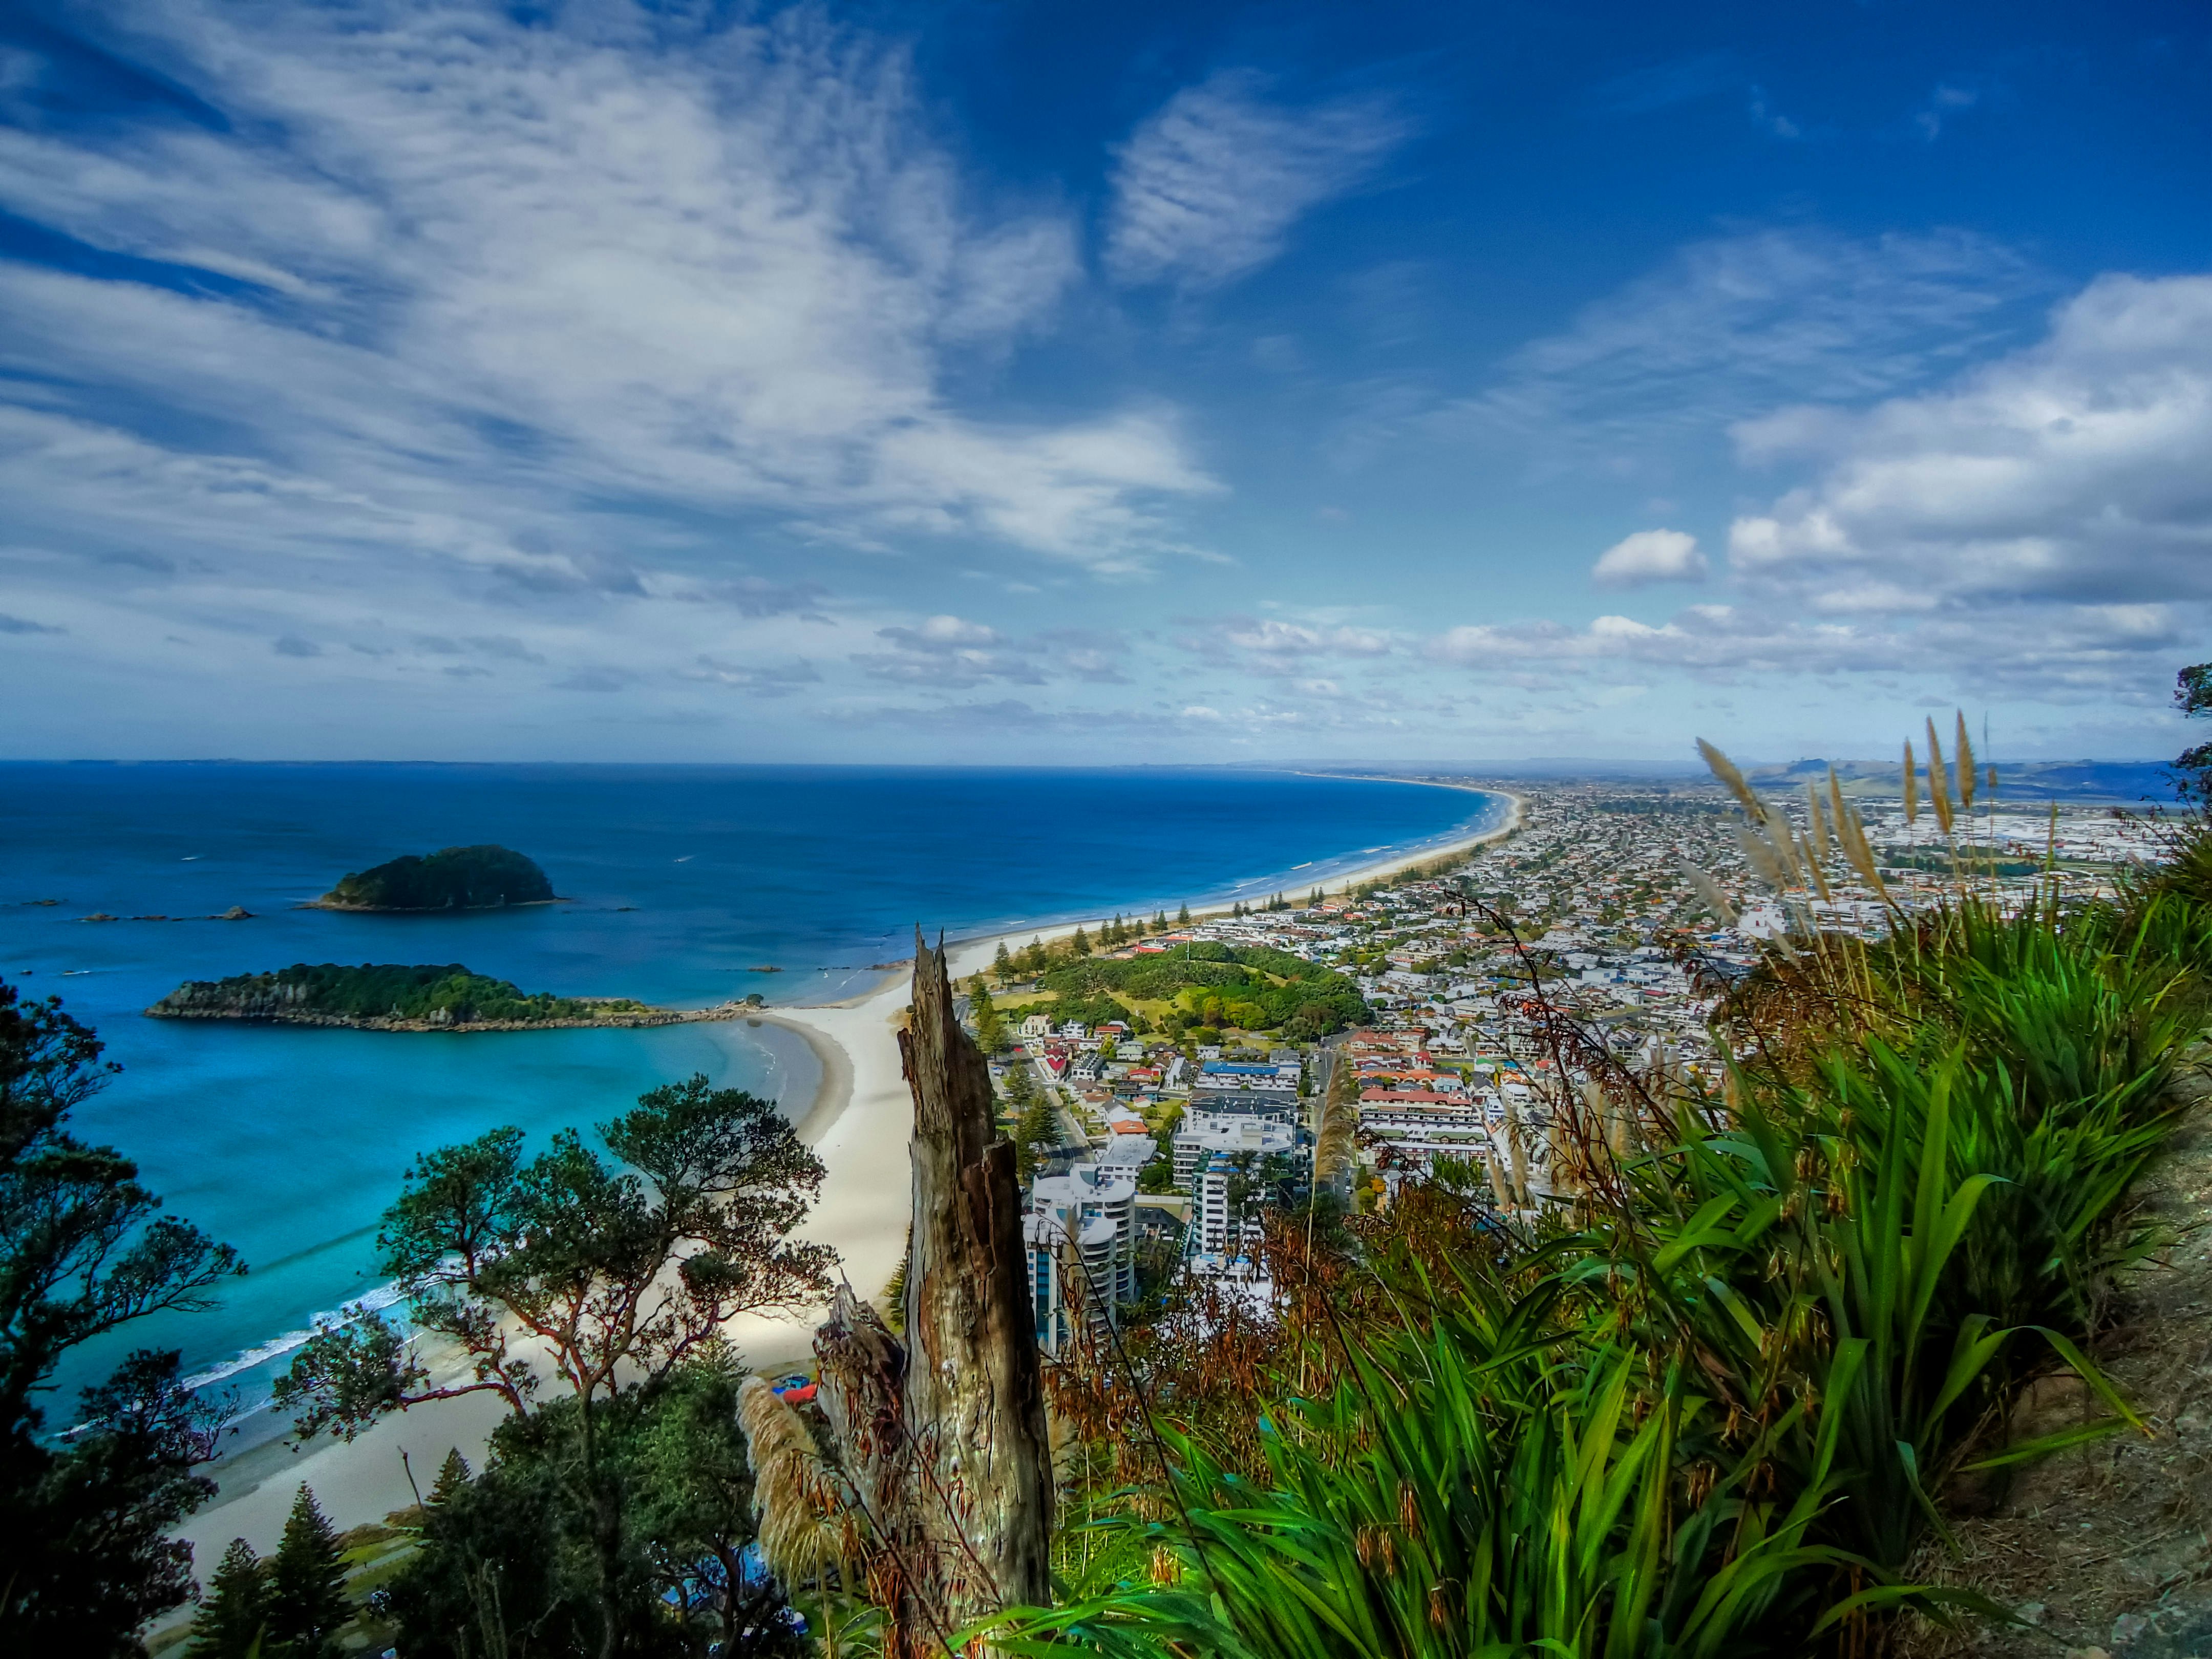 A view from the top of Mt Maunganui in Tauranga, New Zealand; the city can be seen below, fringed by a sandy beach leading to a blue-green sea.